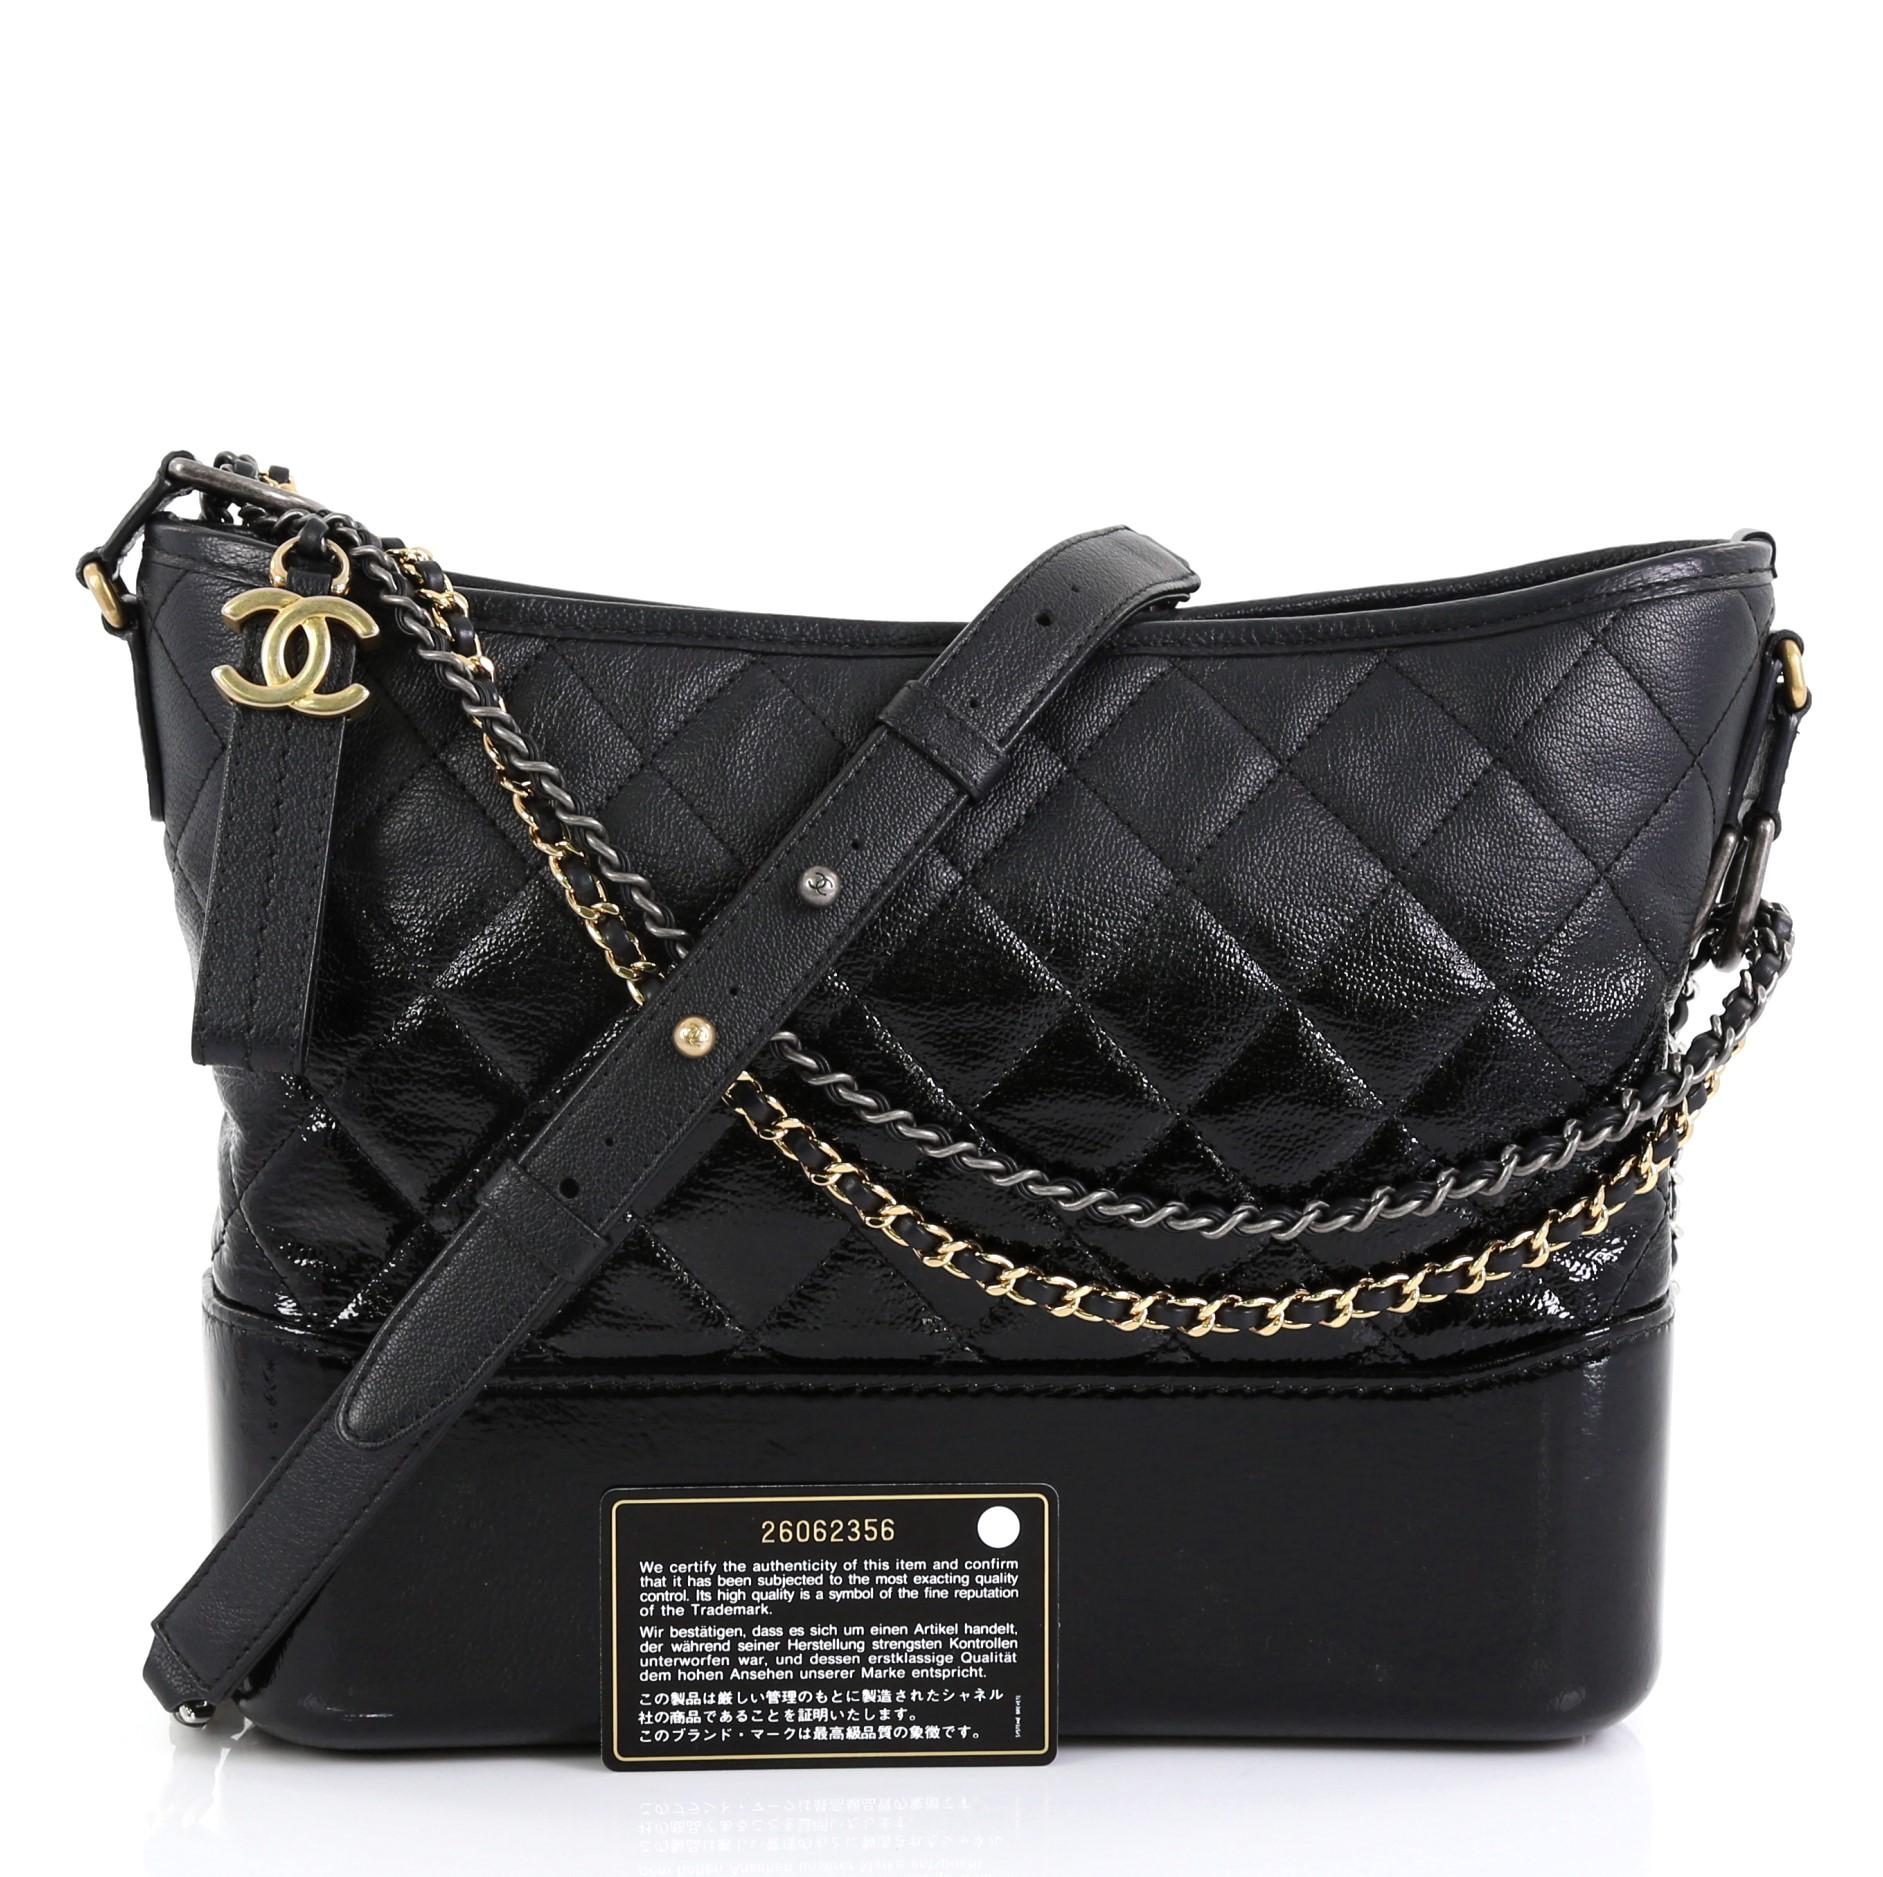 This Chanel Gabrielle Hobo Quilted Goatskin and Patent Medium, crafted from black quilted goatskin and patent leather, features woven-in leather chain strap with leather pad, leather zip pull with CC logo, and aged silver-tone hardware. Its zip